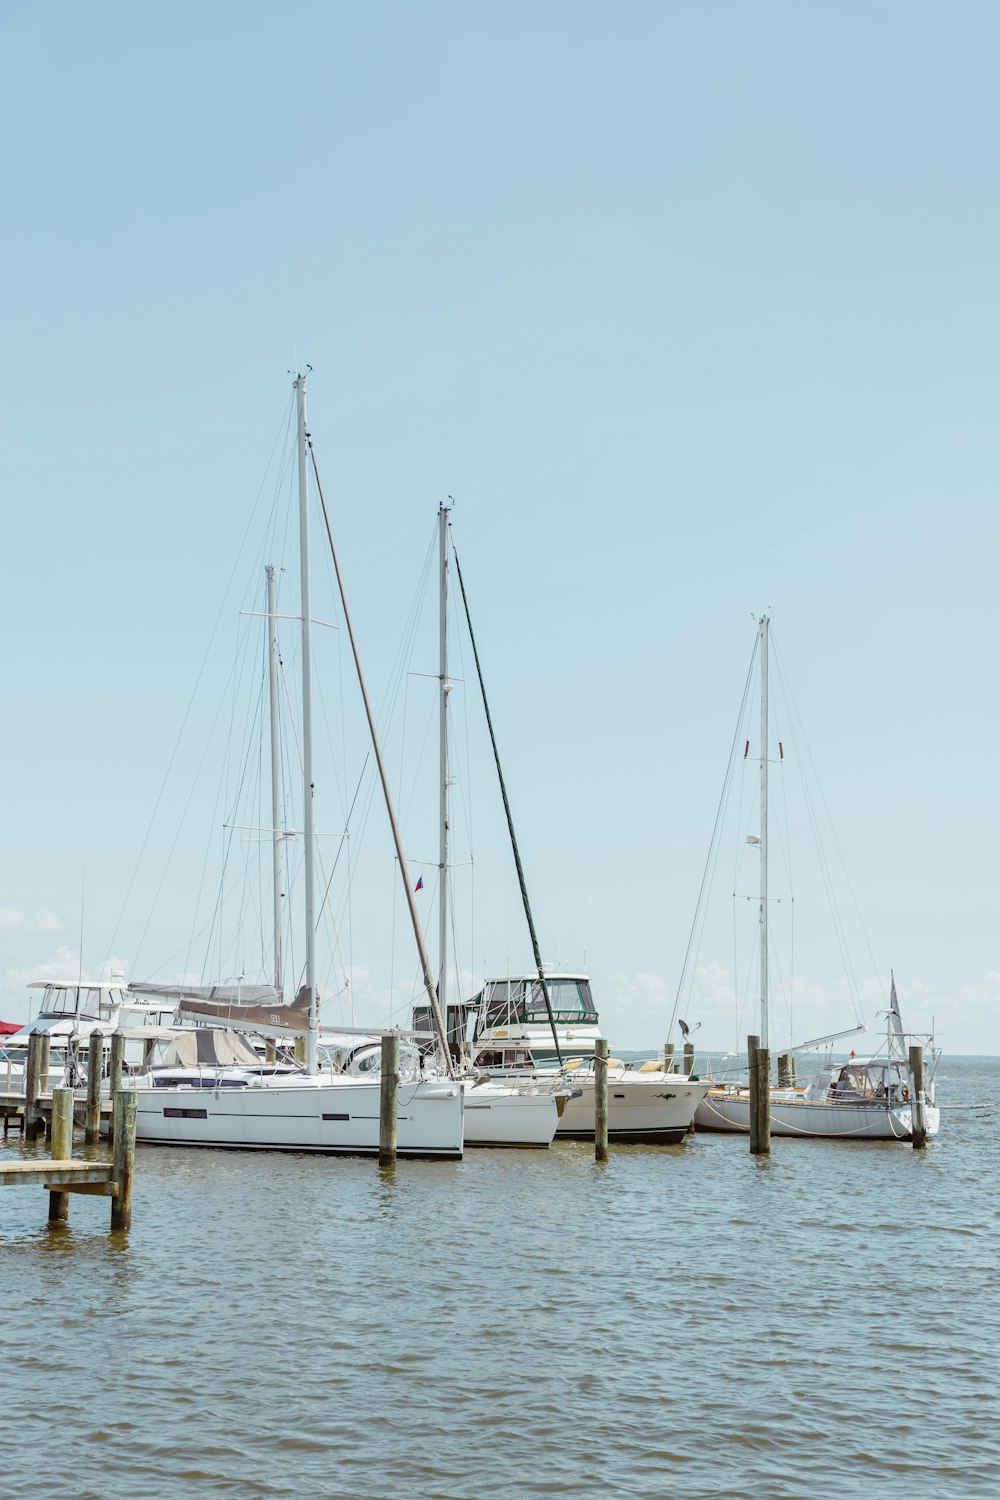 a group of sailboats docked at a pier